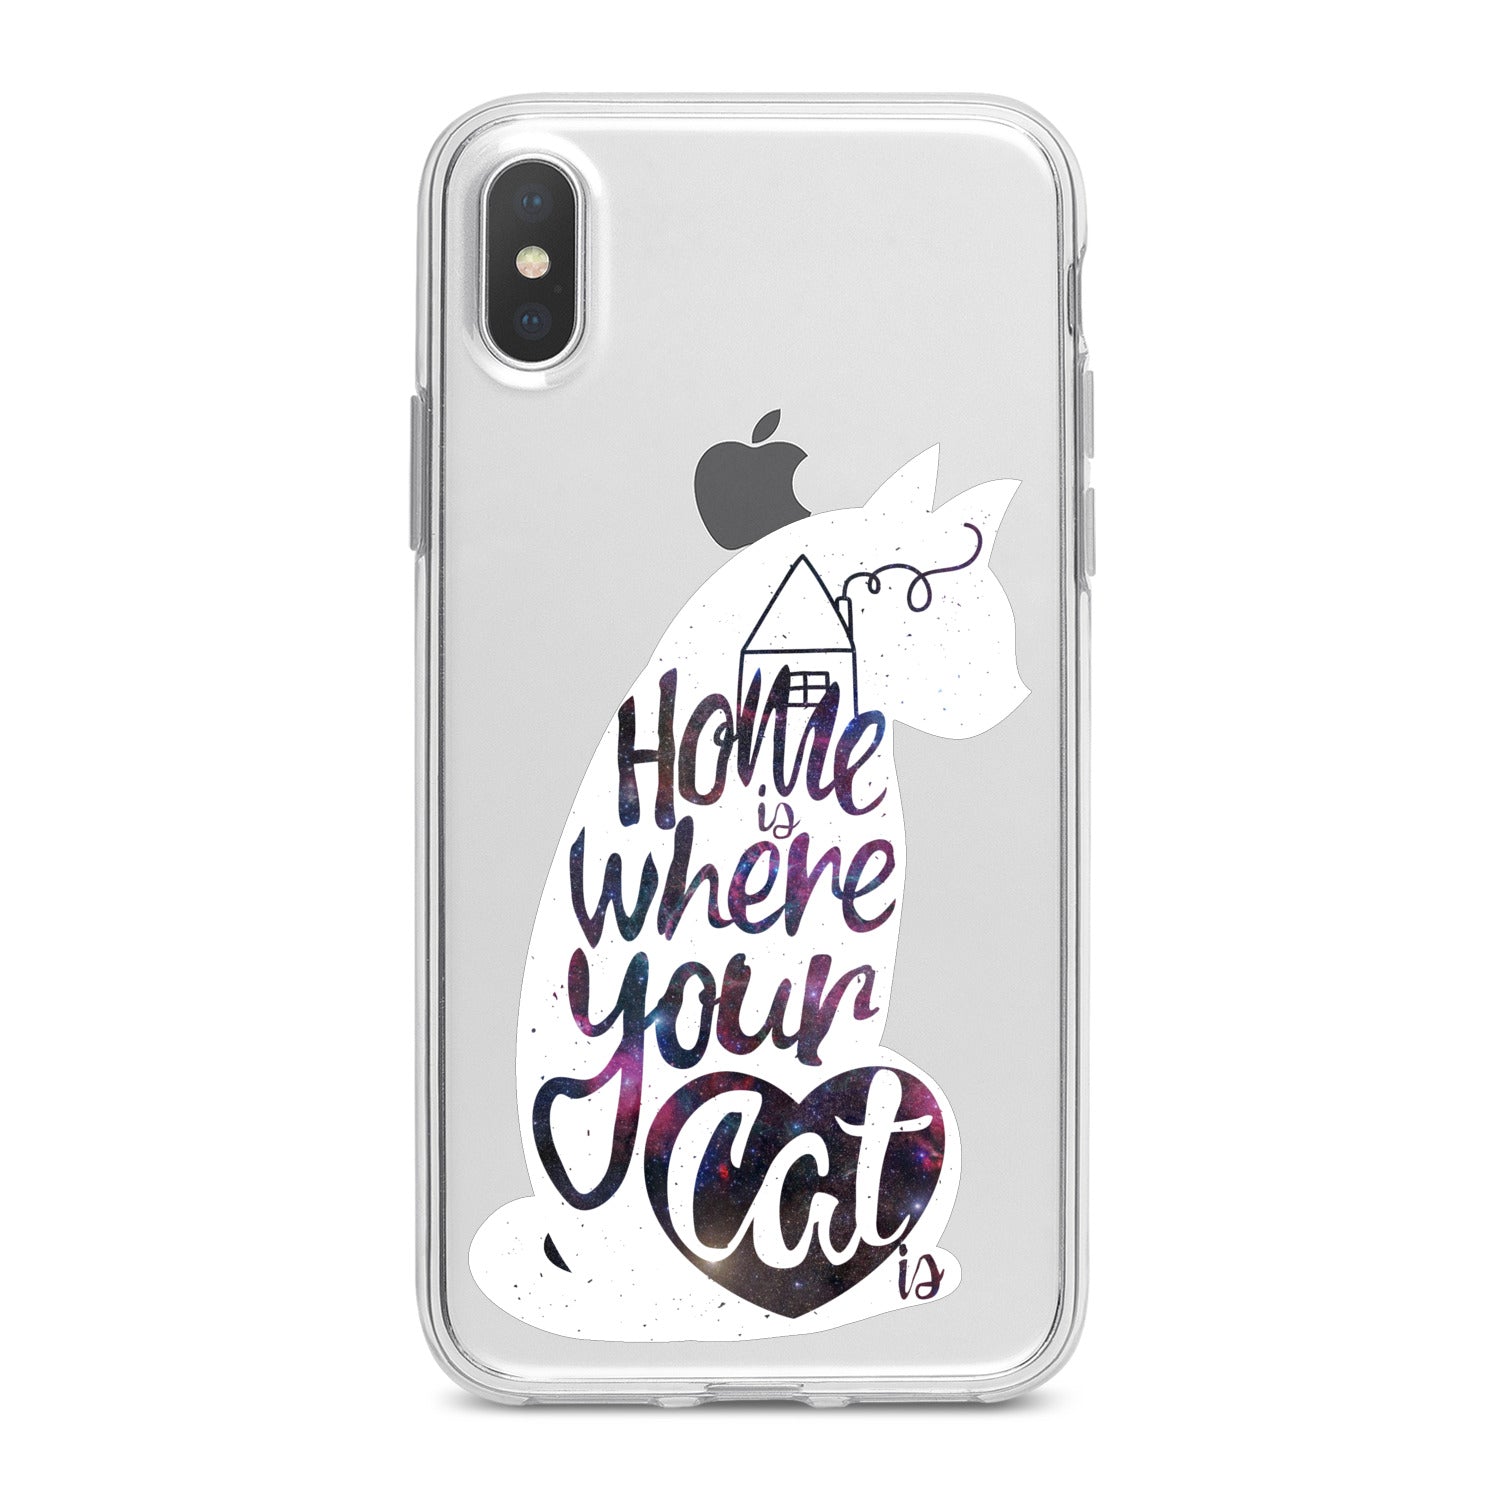 Lex Altern Cat Quote Pattern Phone Case for your iPhone & Android phone.